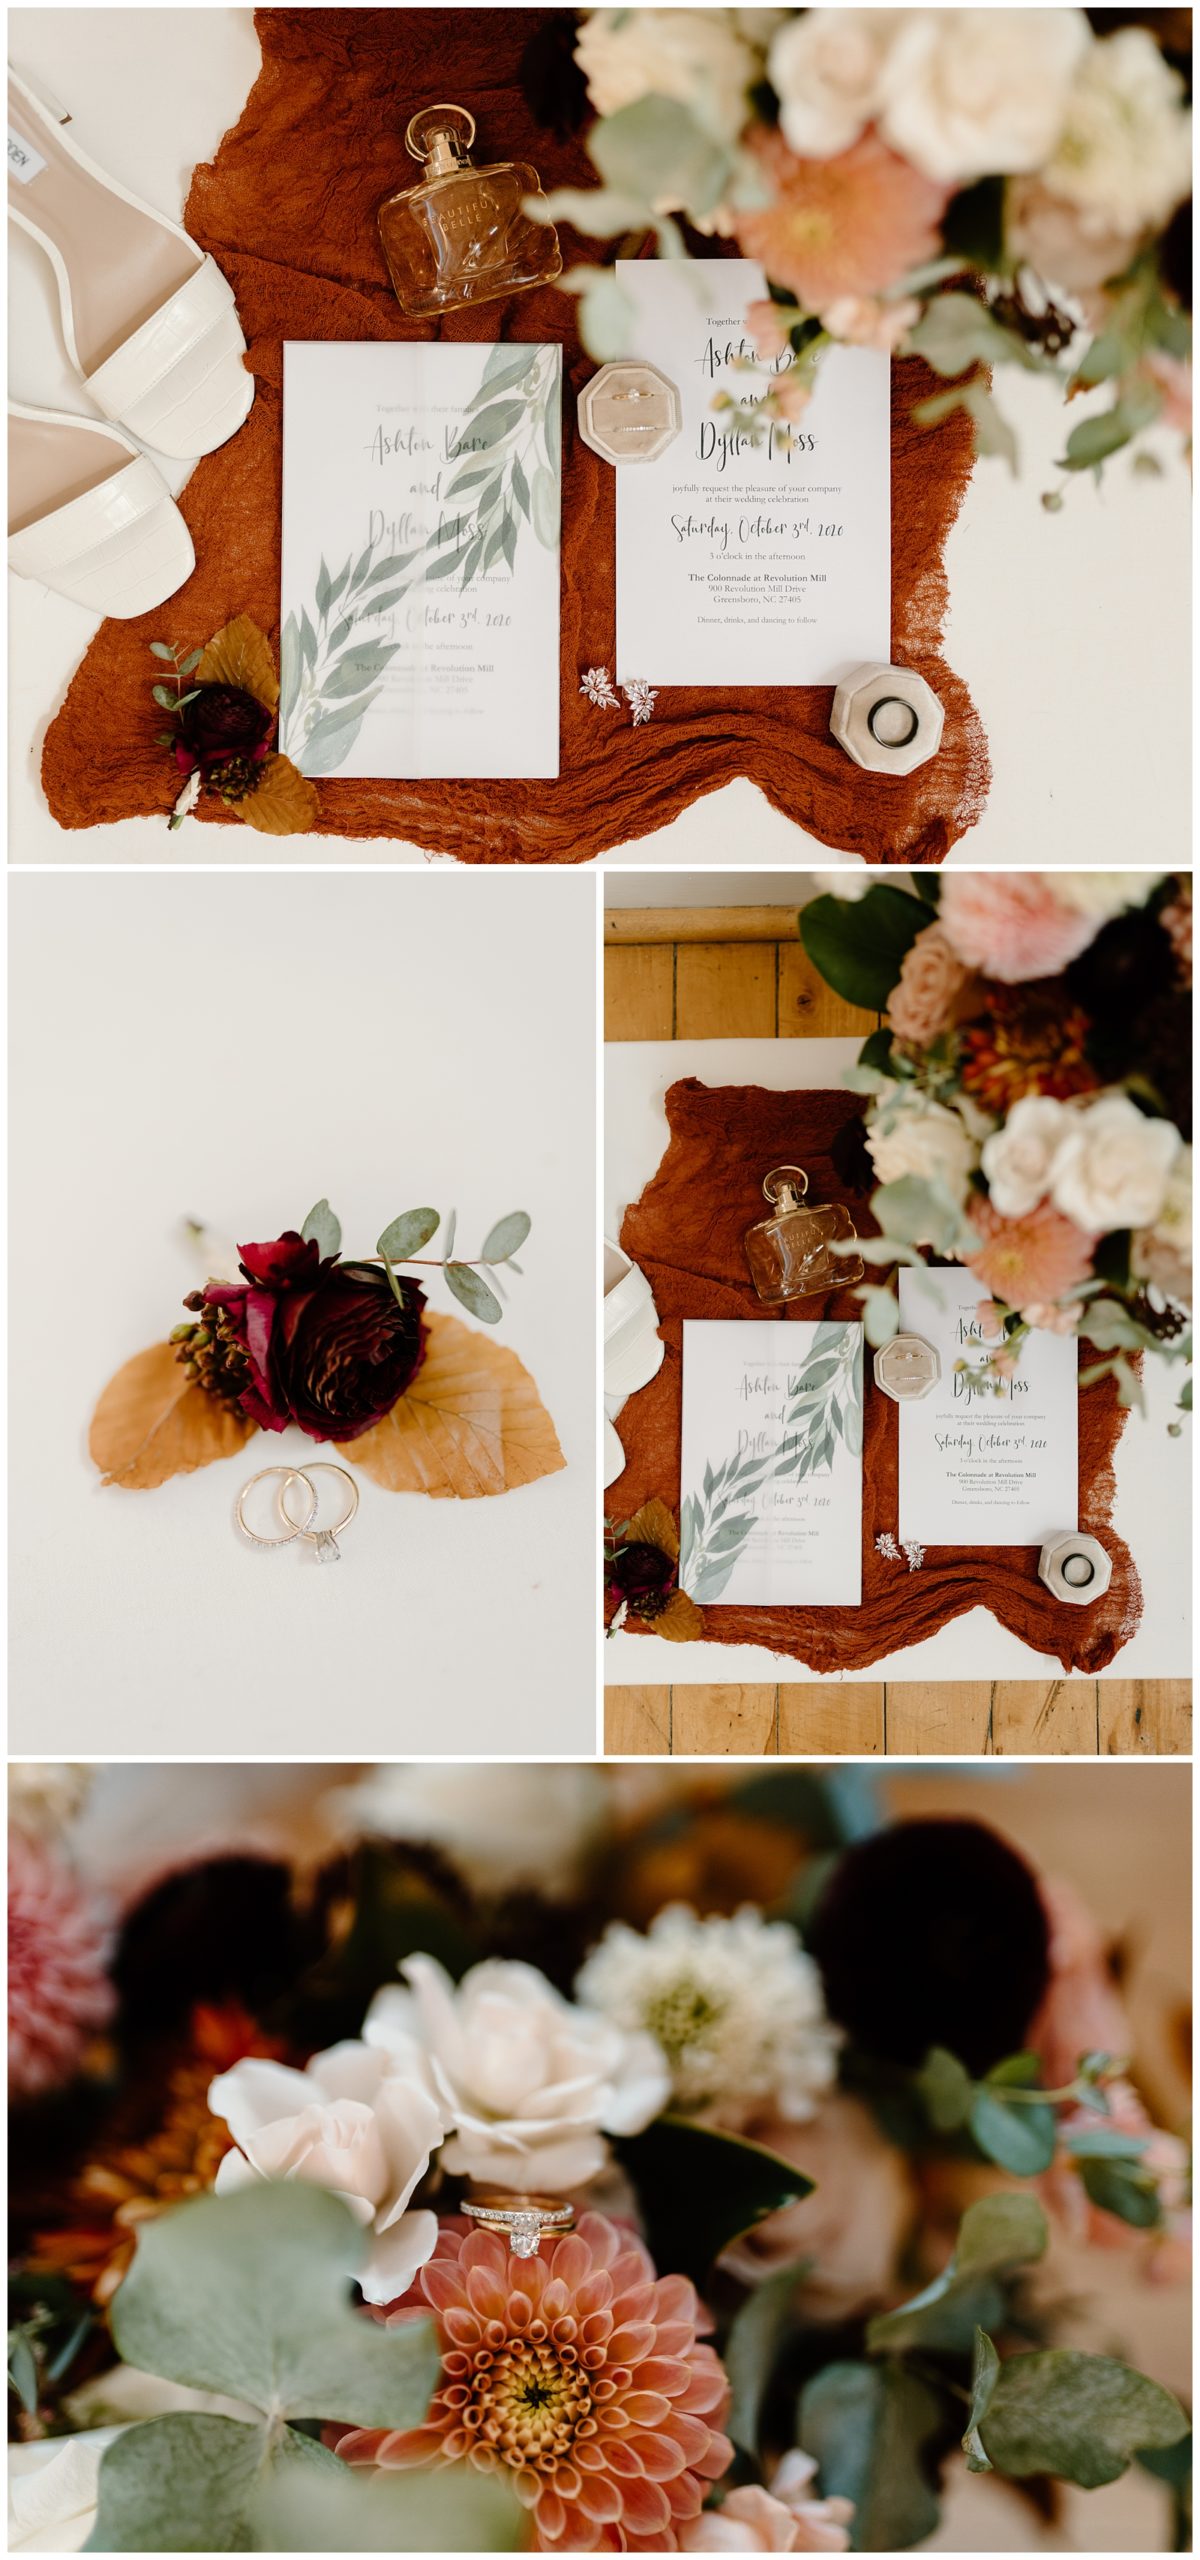 Classic fall wedding details: rustic colors and classy touches